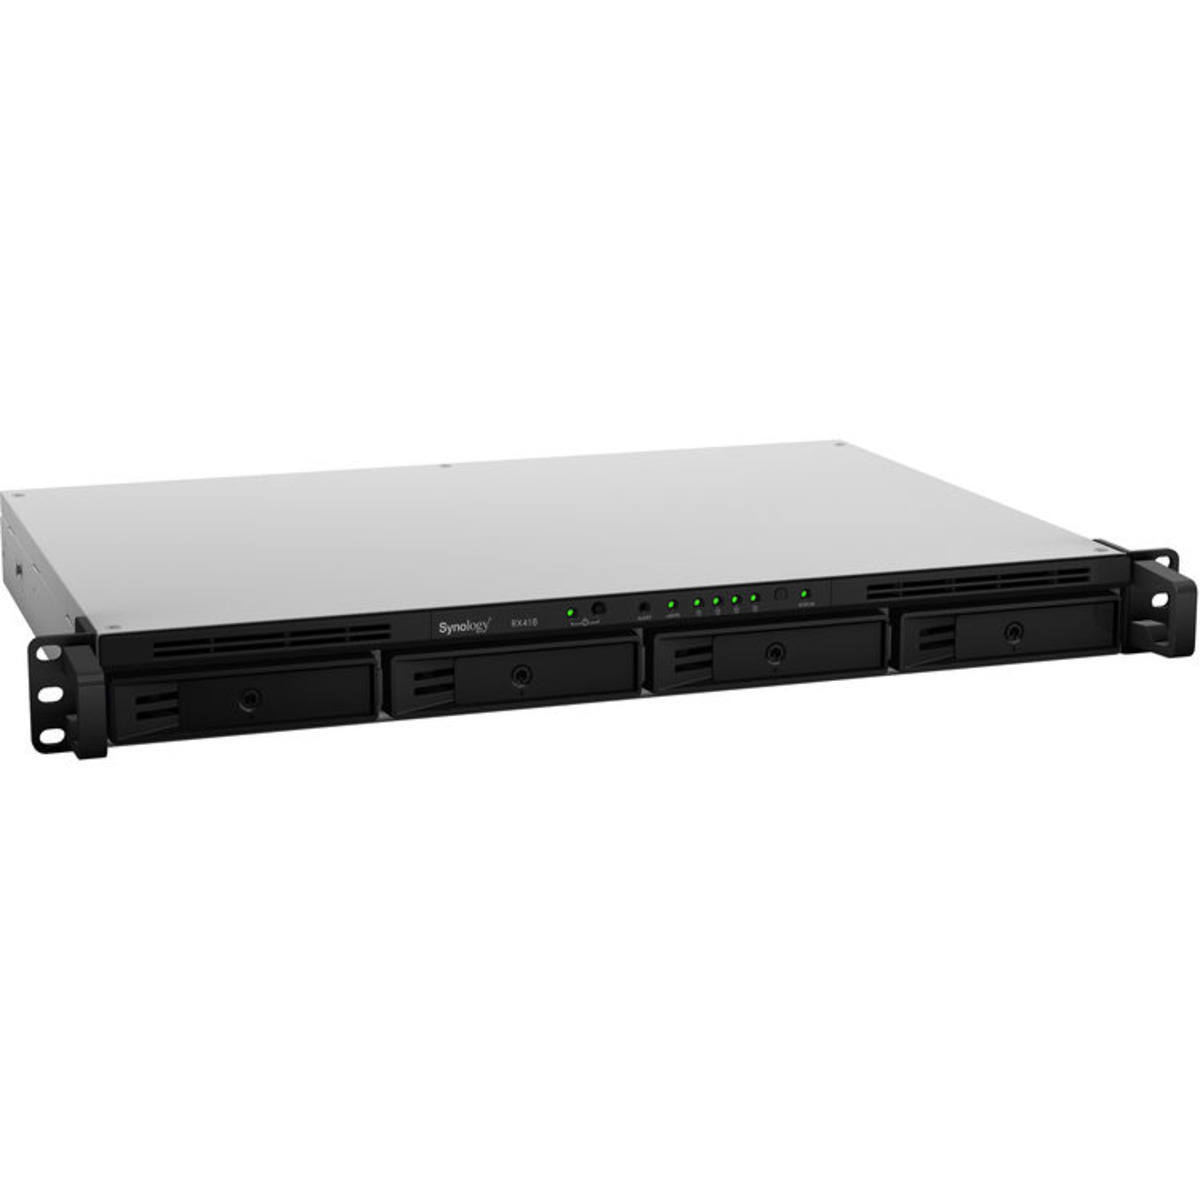 Synology RX418 External Expansion Drive 12tb 4-Bay RackMount Multimedia / Power User / Business Expansion Enclosure 3x4tb Sandisk Ultra 3D SDSSDH3-4T00 2.5 560/520MB/s SATA 6Gb/s SSD CONSUMER Class Drives Installed - Burn-In Tested RX418 External Expansion Drive